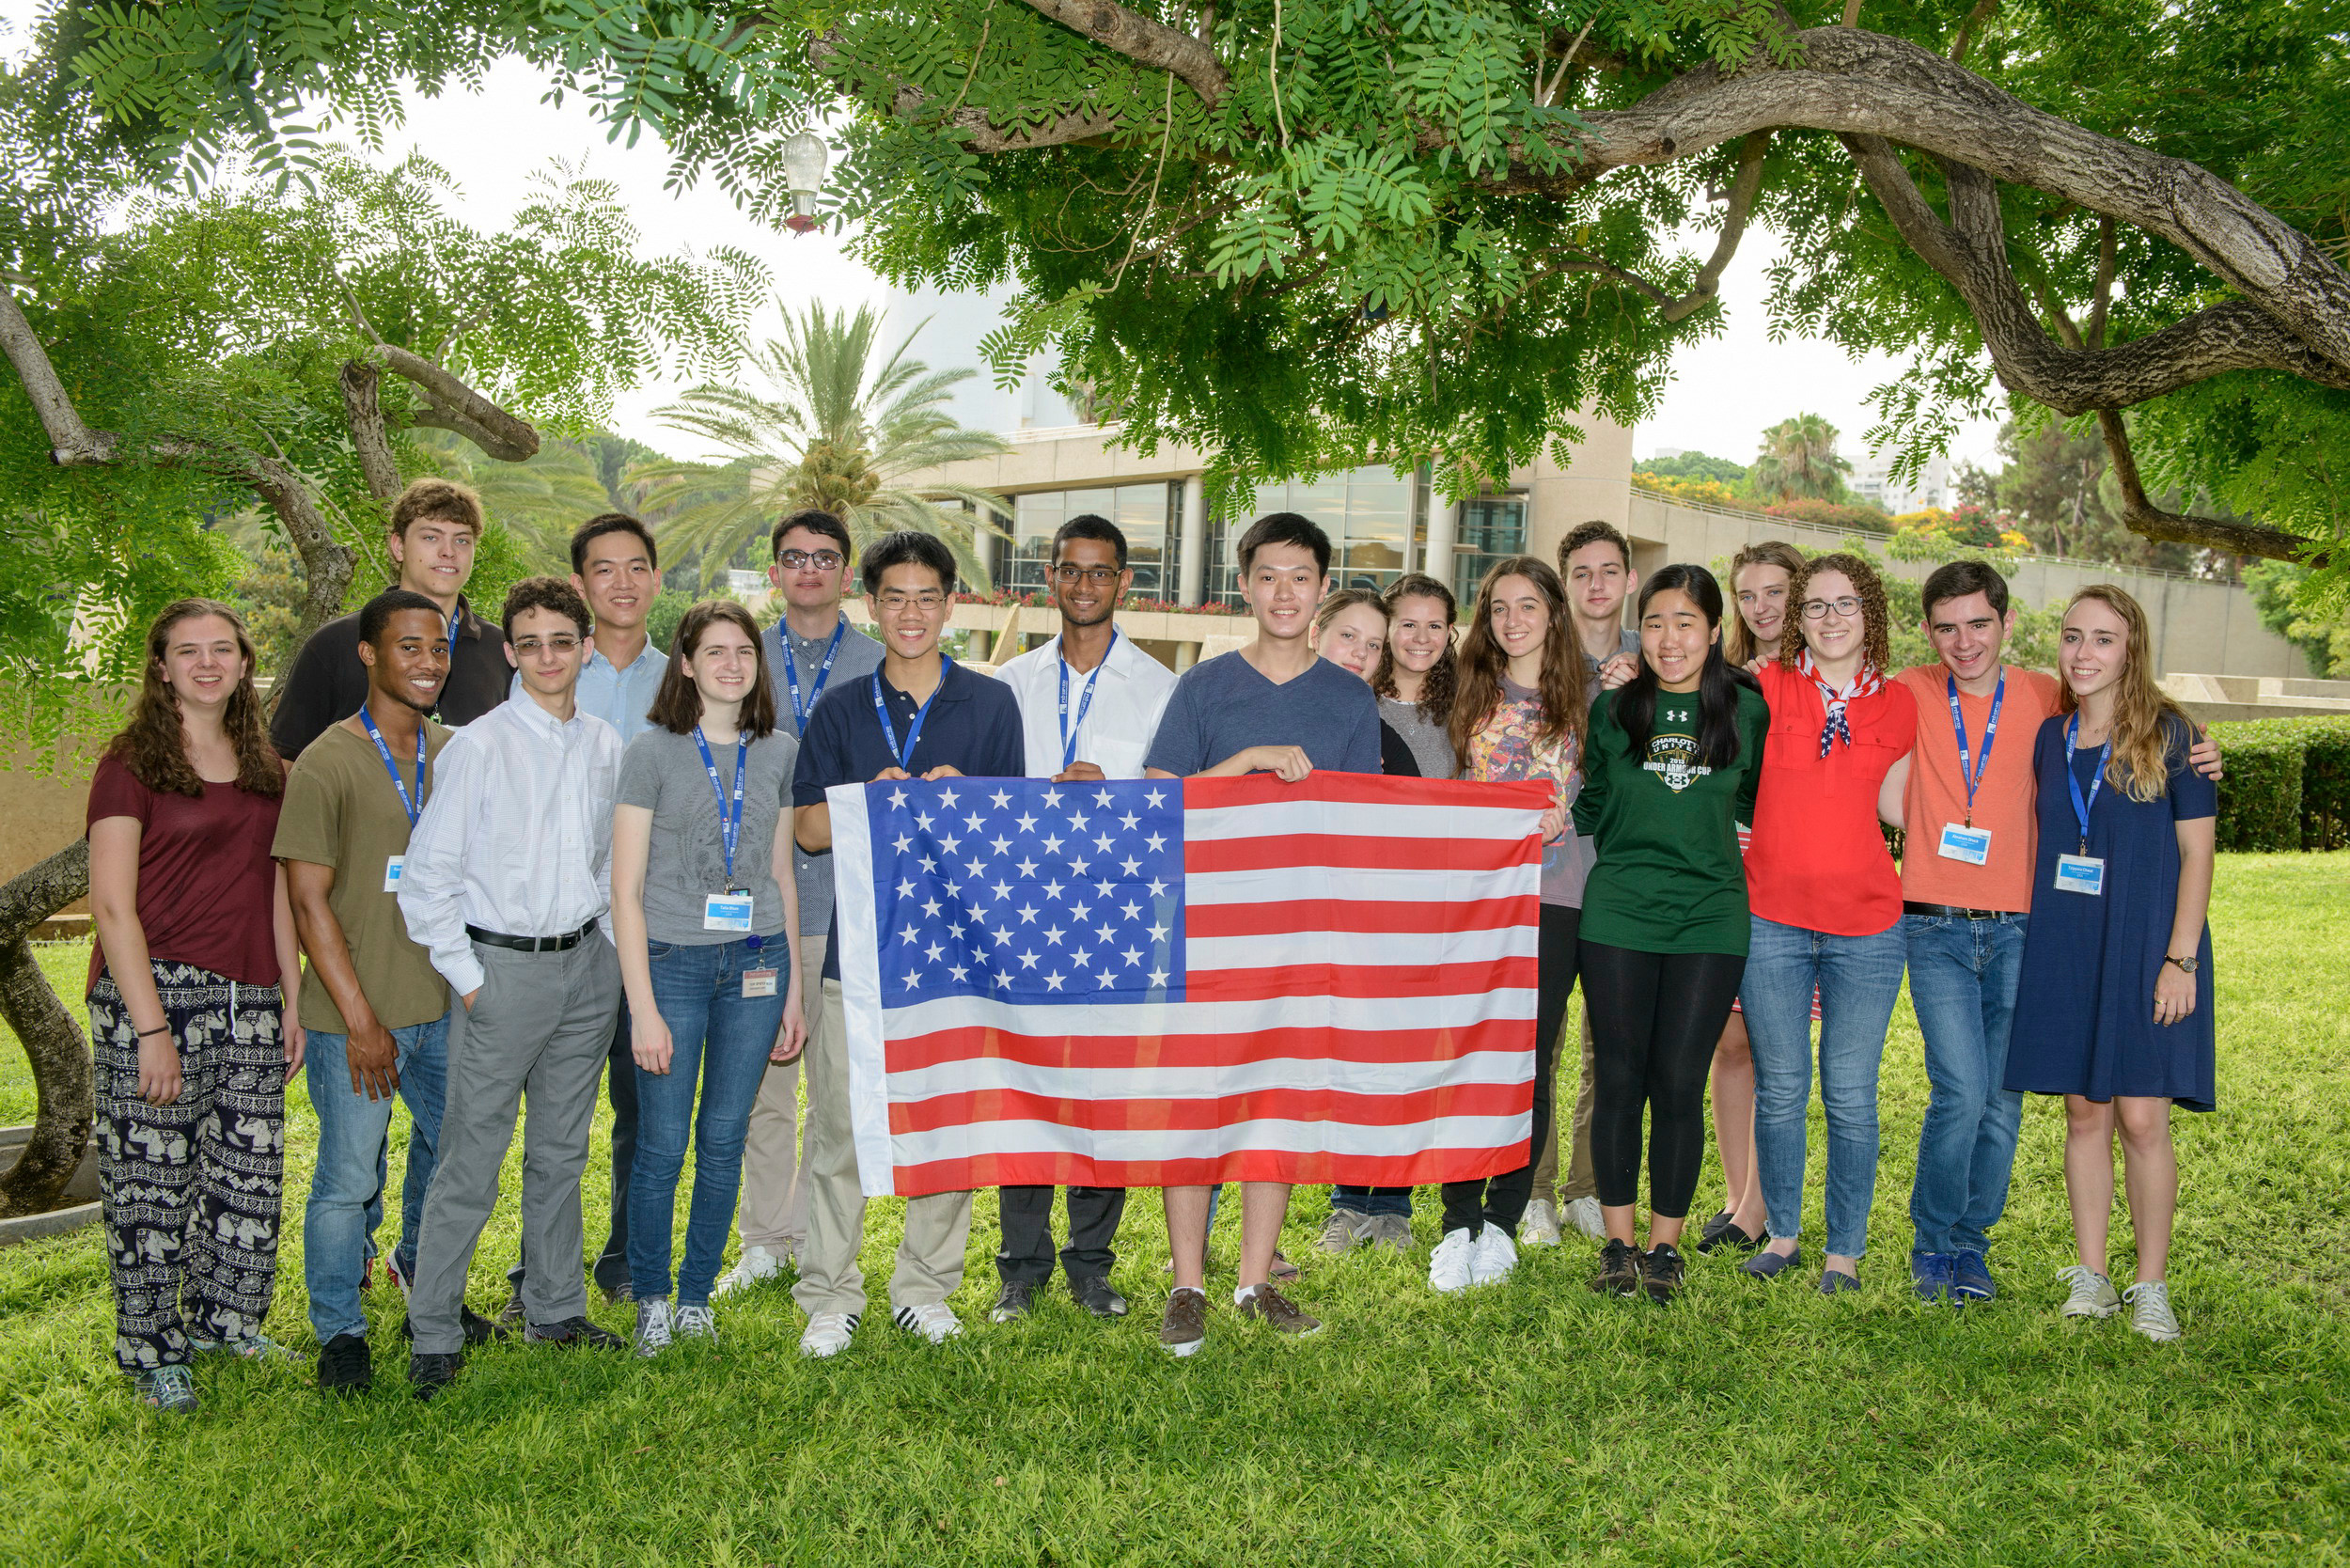 The 19 American students who took part in the Weizmann Institute of Science summer program. Tzippora Chwat is at far right.